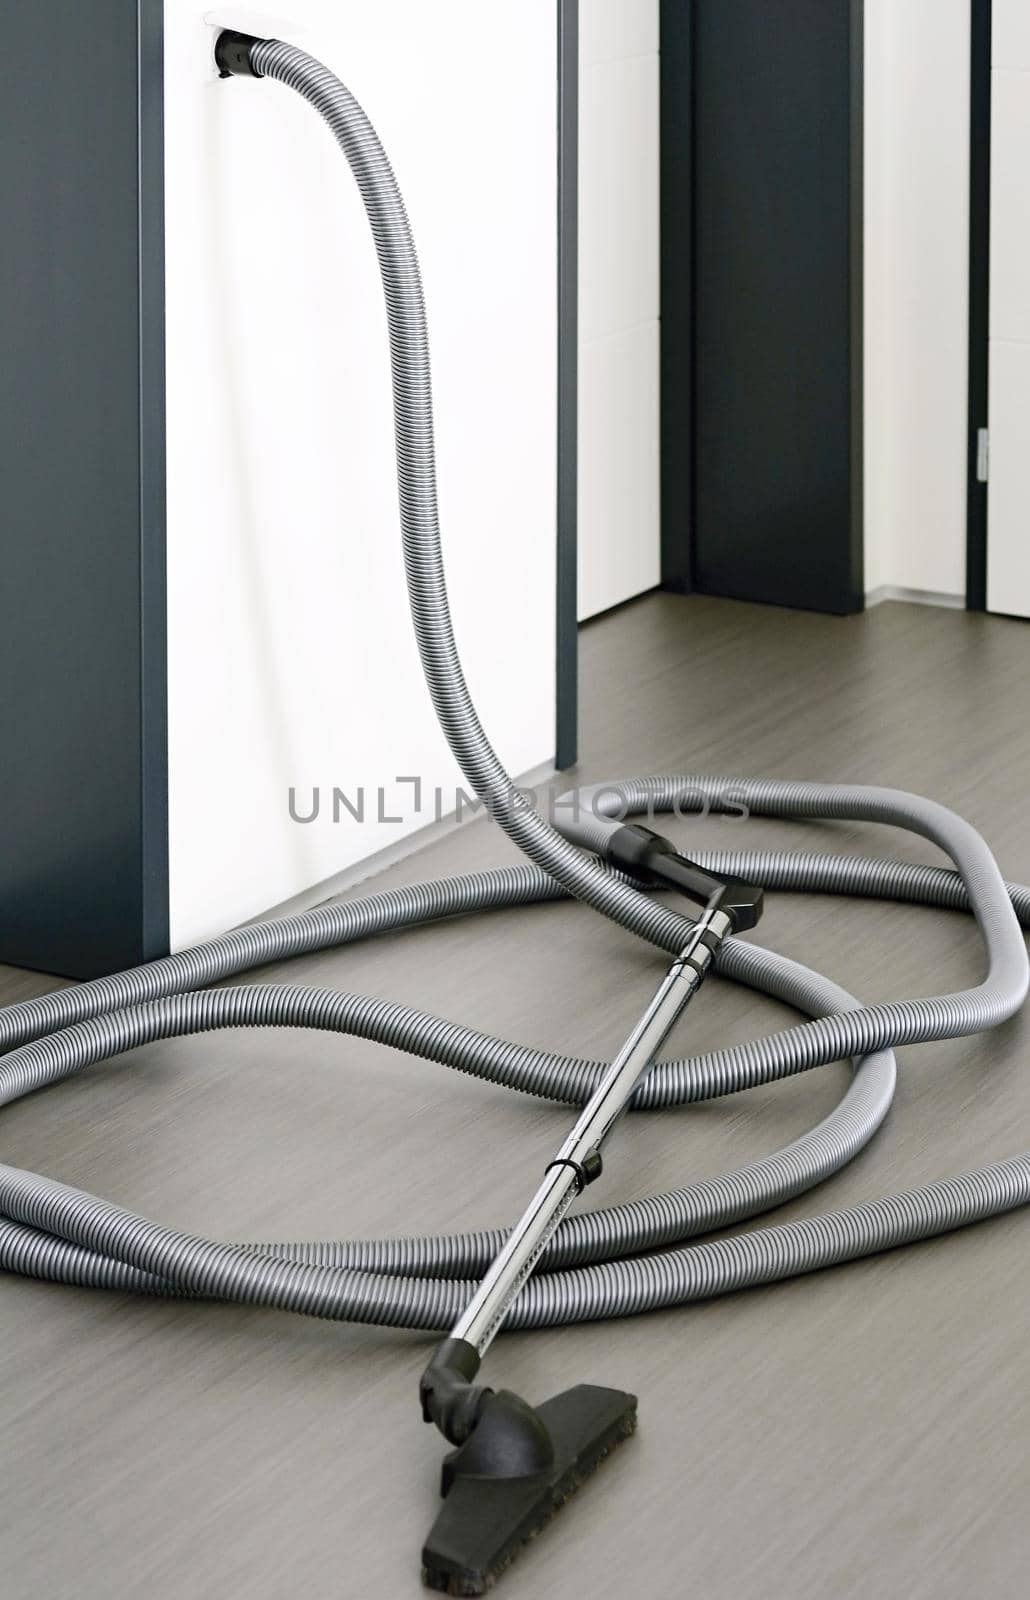 Long central vacuum cleaner hose laid on the grey floor in the room. Hose of central vacuum cleaner plugged into a wall inlet valve socket.